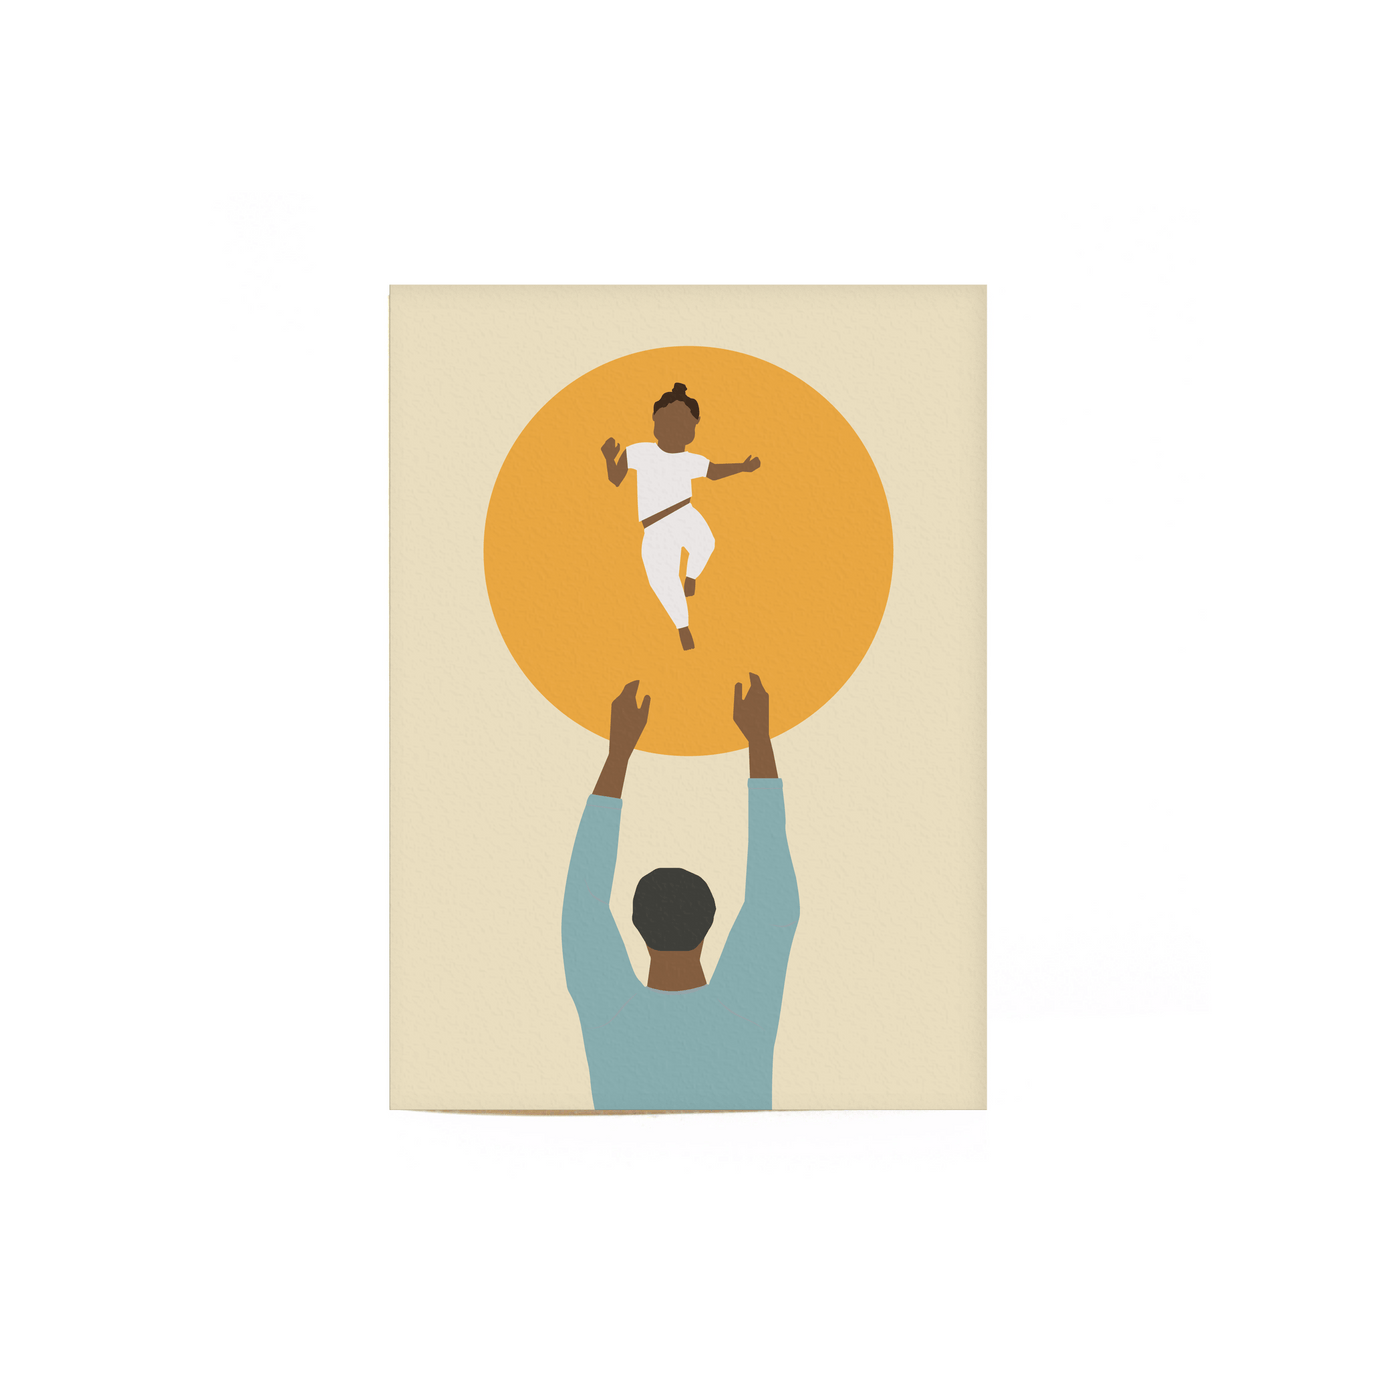 kinfolk card number 5 that illustrates a small child being playfully tossed into the air by a male figure